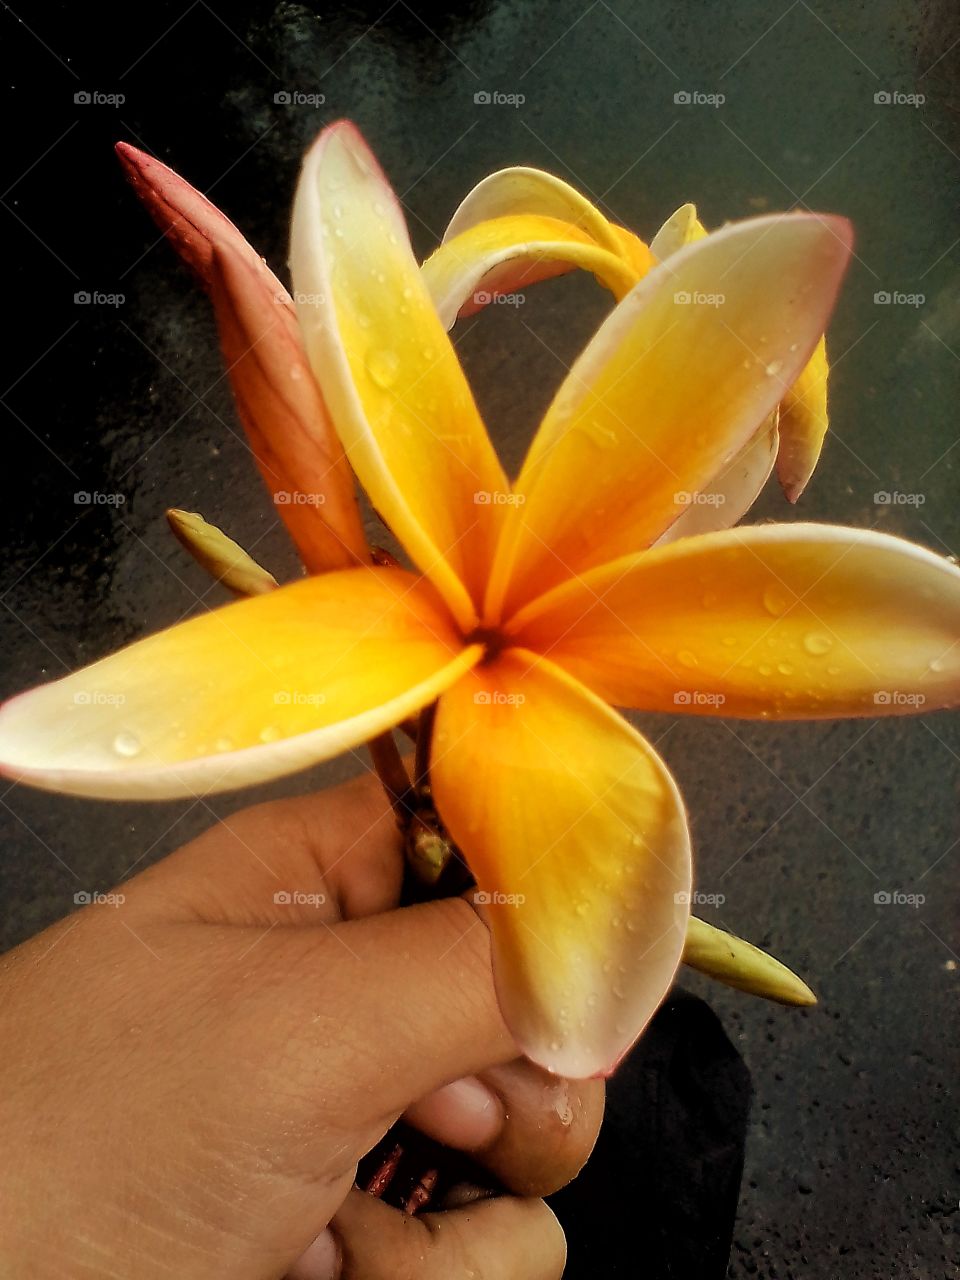 This is yellow fangipani flower